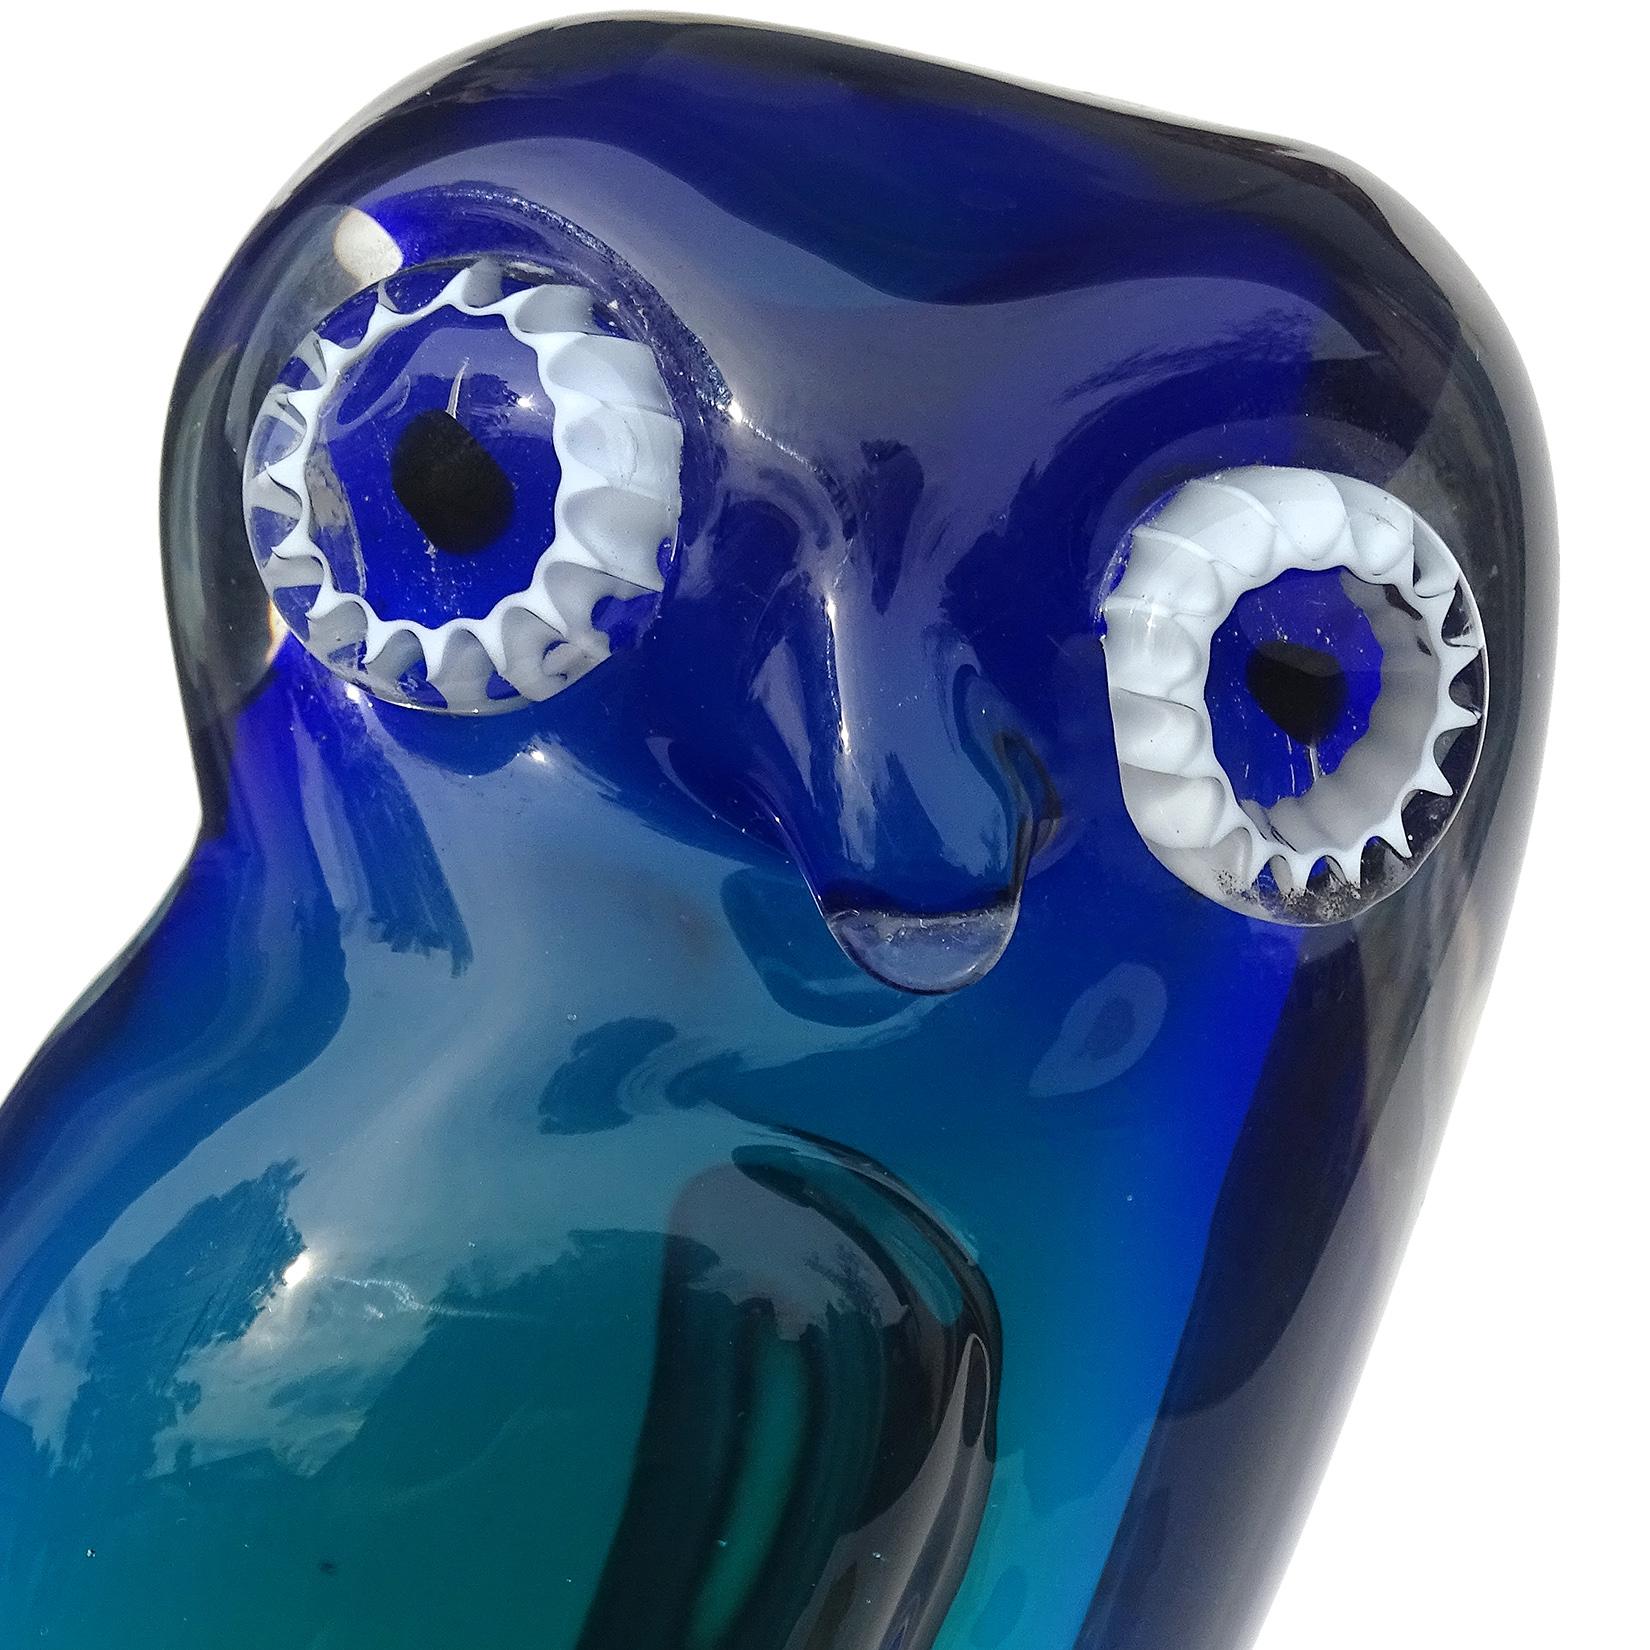 Beautiful vintage Murano hand blown Sommerso cobalt blue to teal blue Italian art glass owl sculpture. Documented to the Salviati Company. Have owned several with labels. It has white murrines for the eyes and stands on clear glass pedestal.